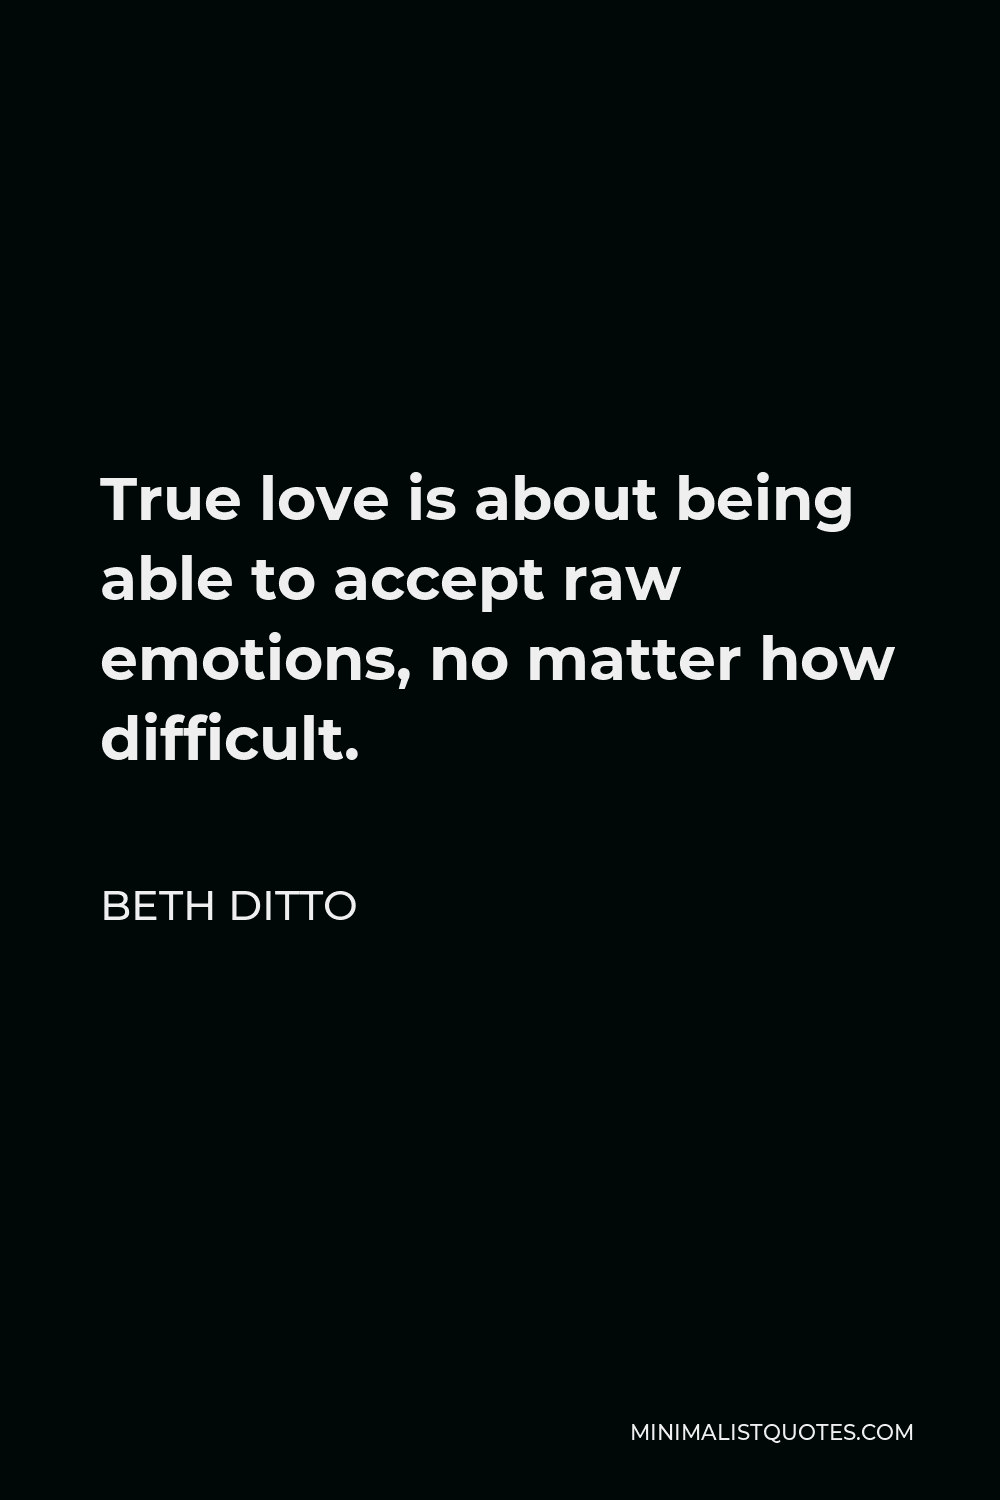 Beth Ditto Quote - True love is about being able to accept raw emotions, no matter how difficult.